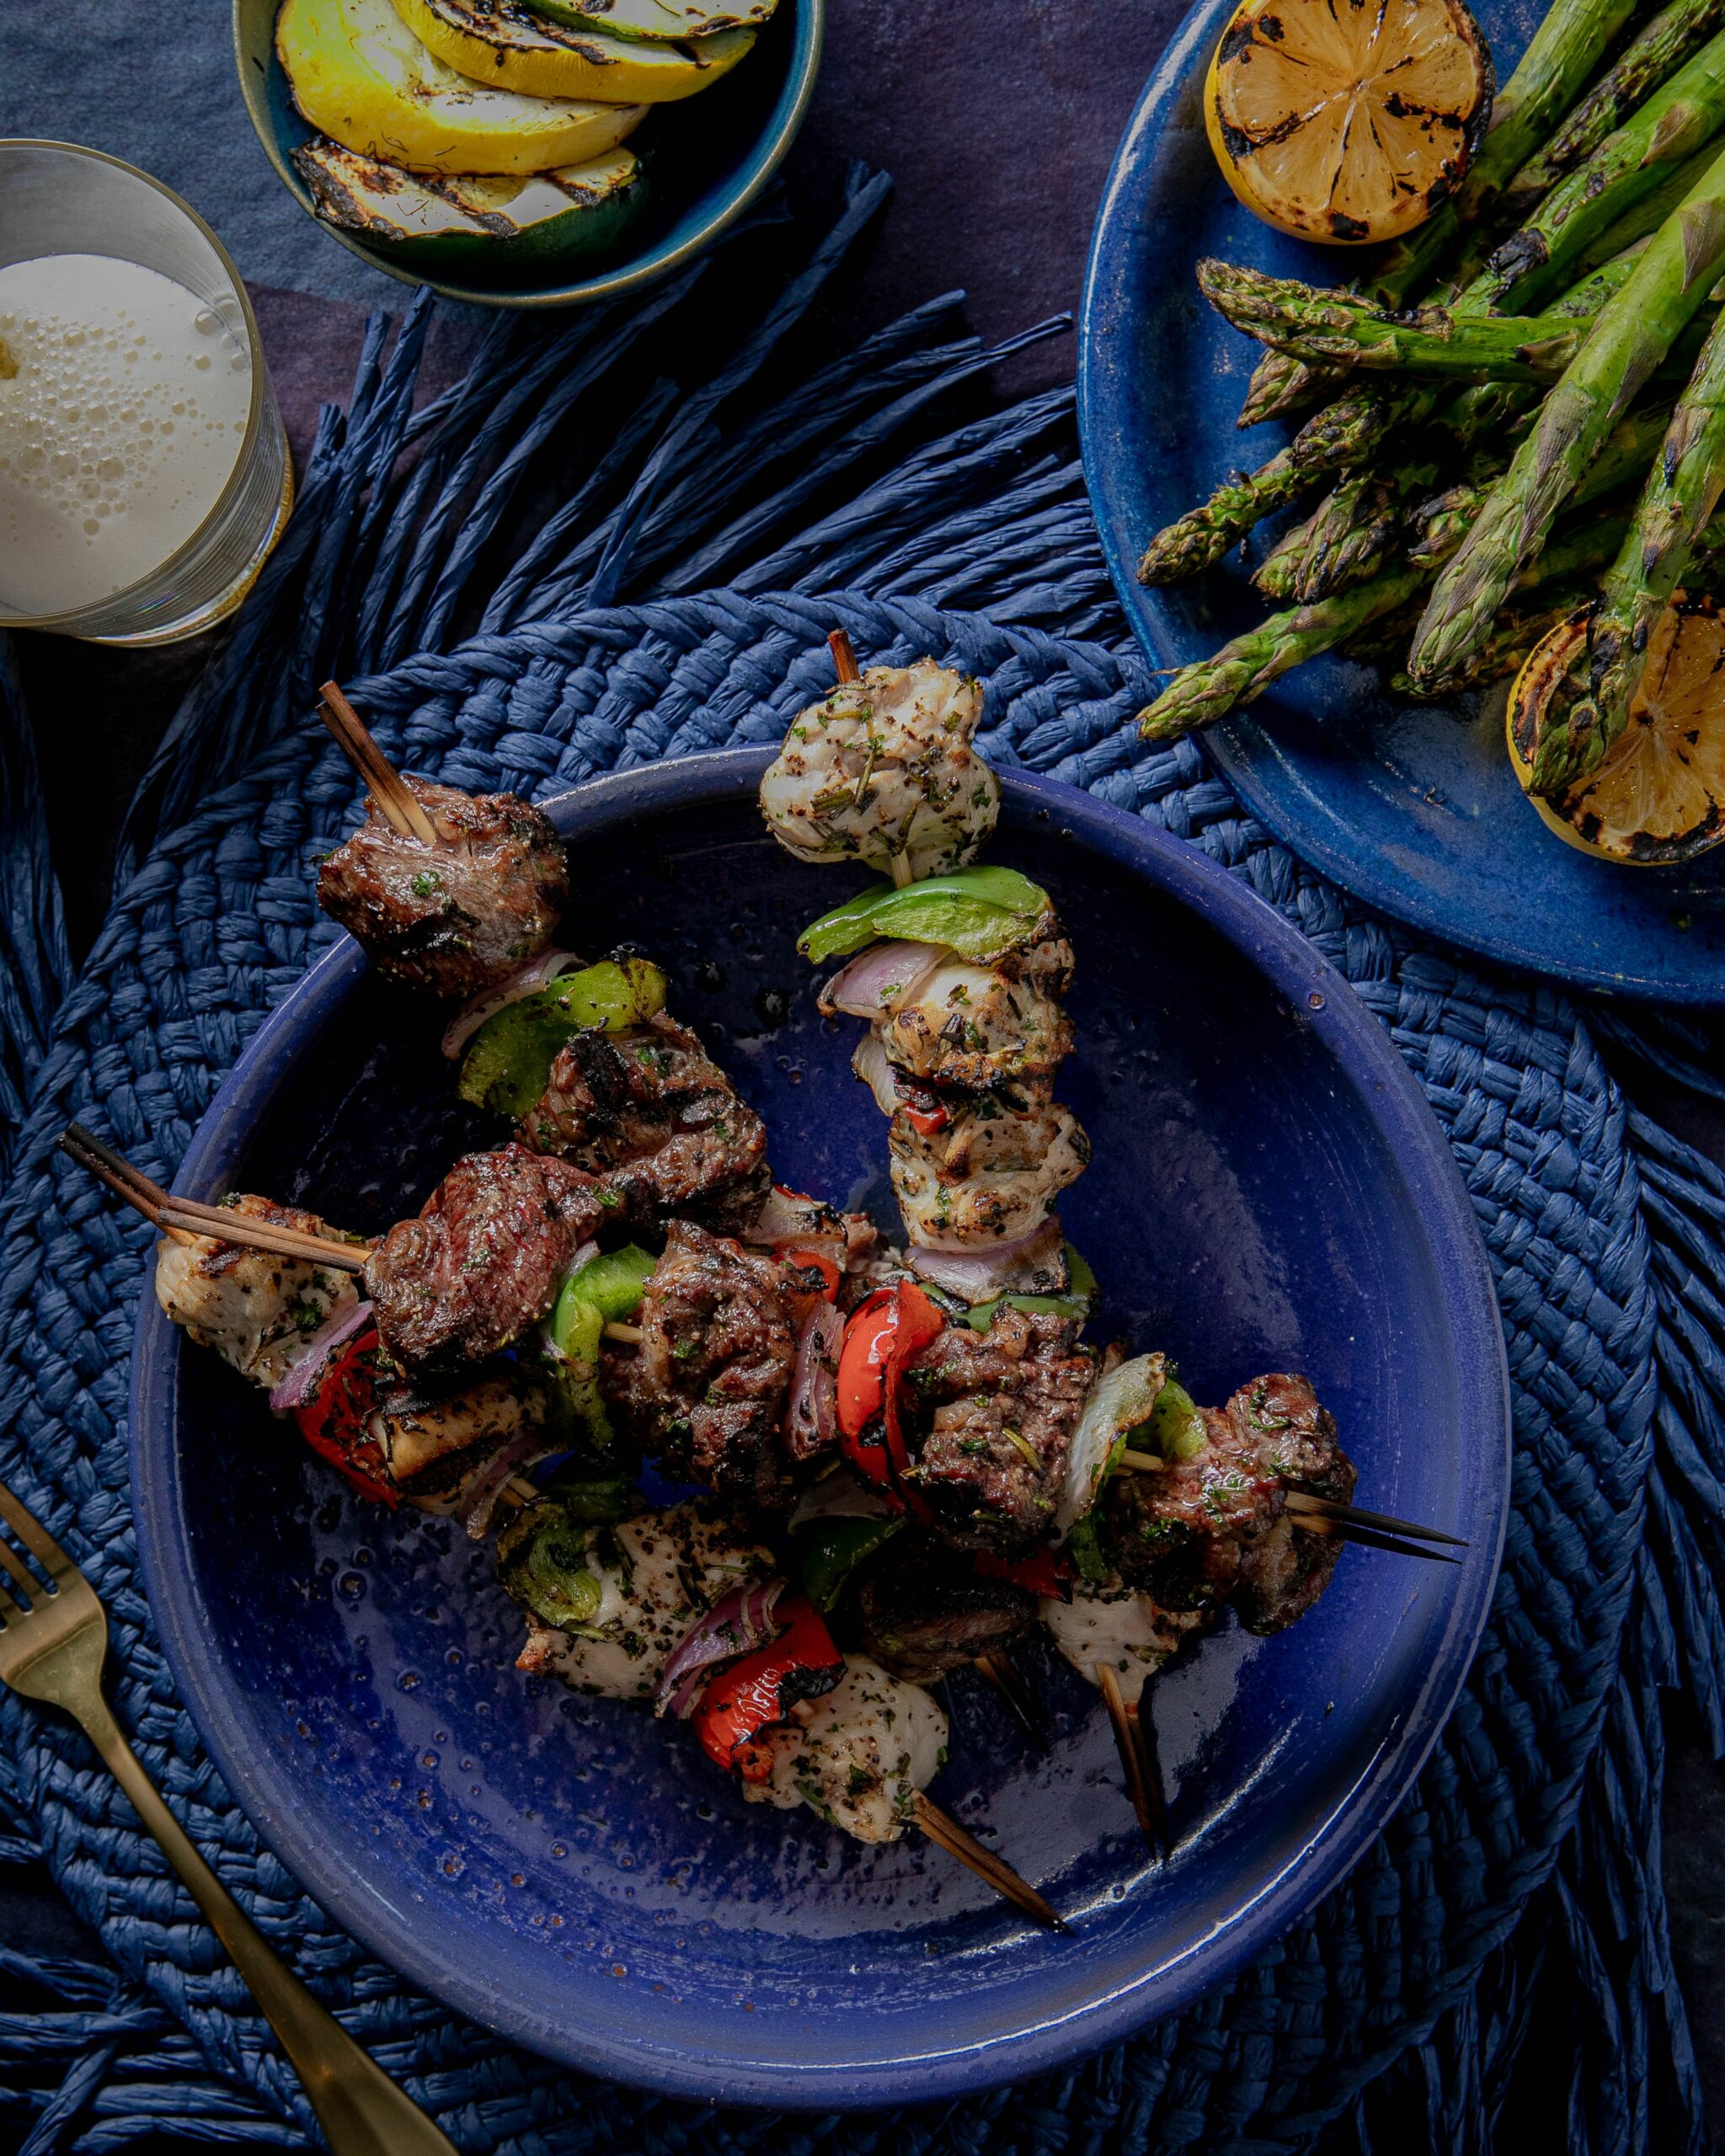 Skewers with beef, chicken, and vegetables on a blue plate and blue straw placemat with a glass of beer and a separate plate of grilled vegetables